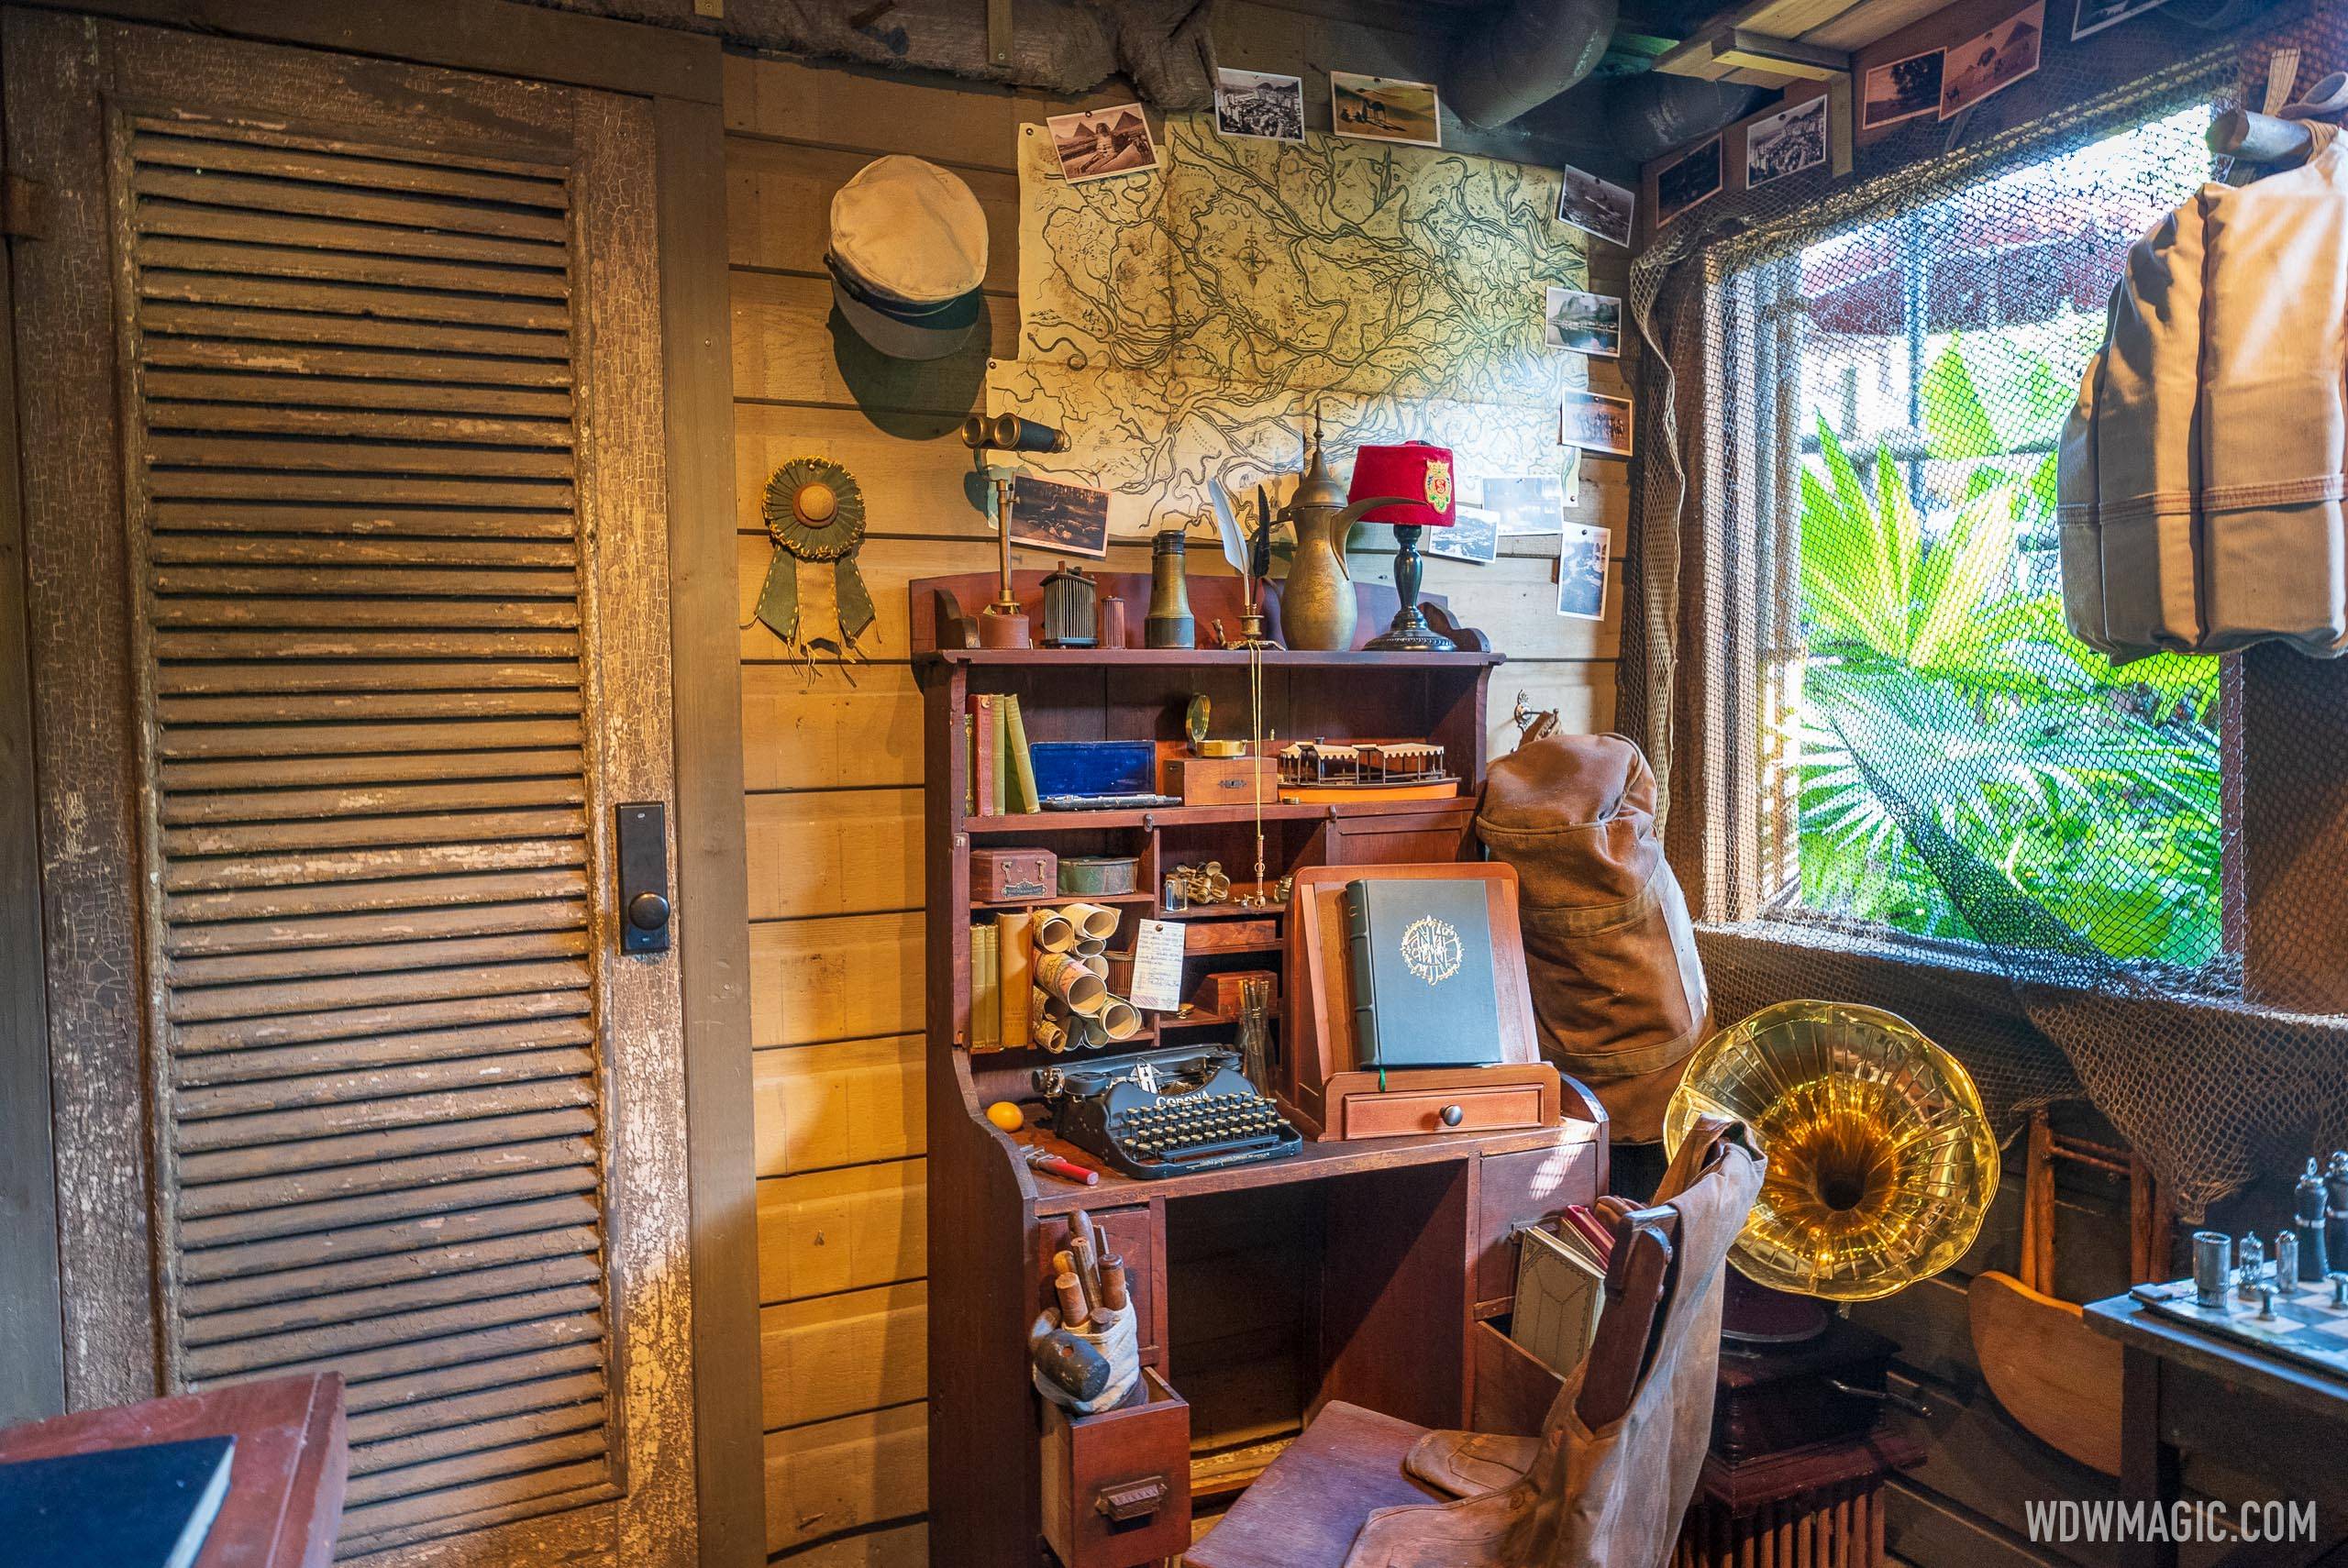 New props added to the office in the Jungle Cruise queue at Walt Disney World